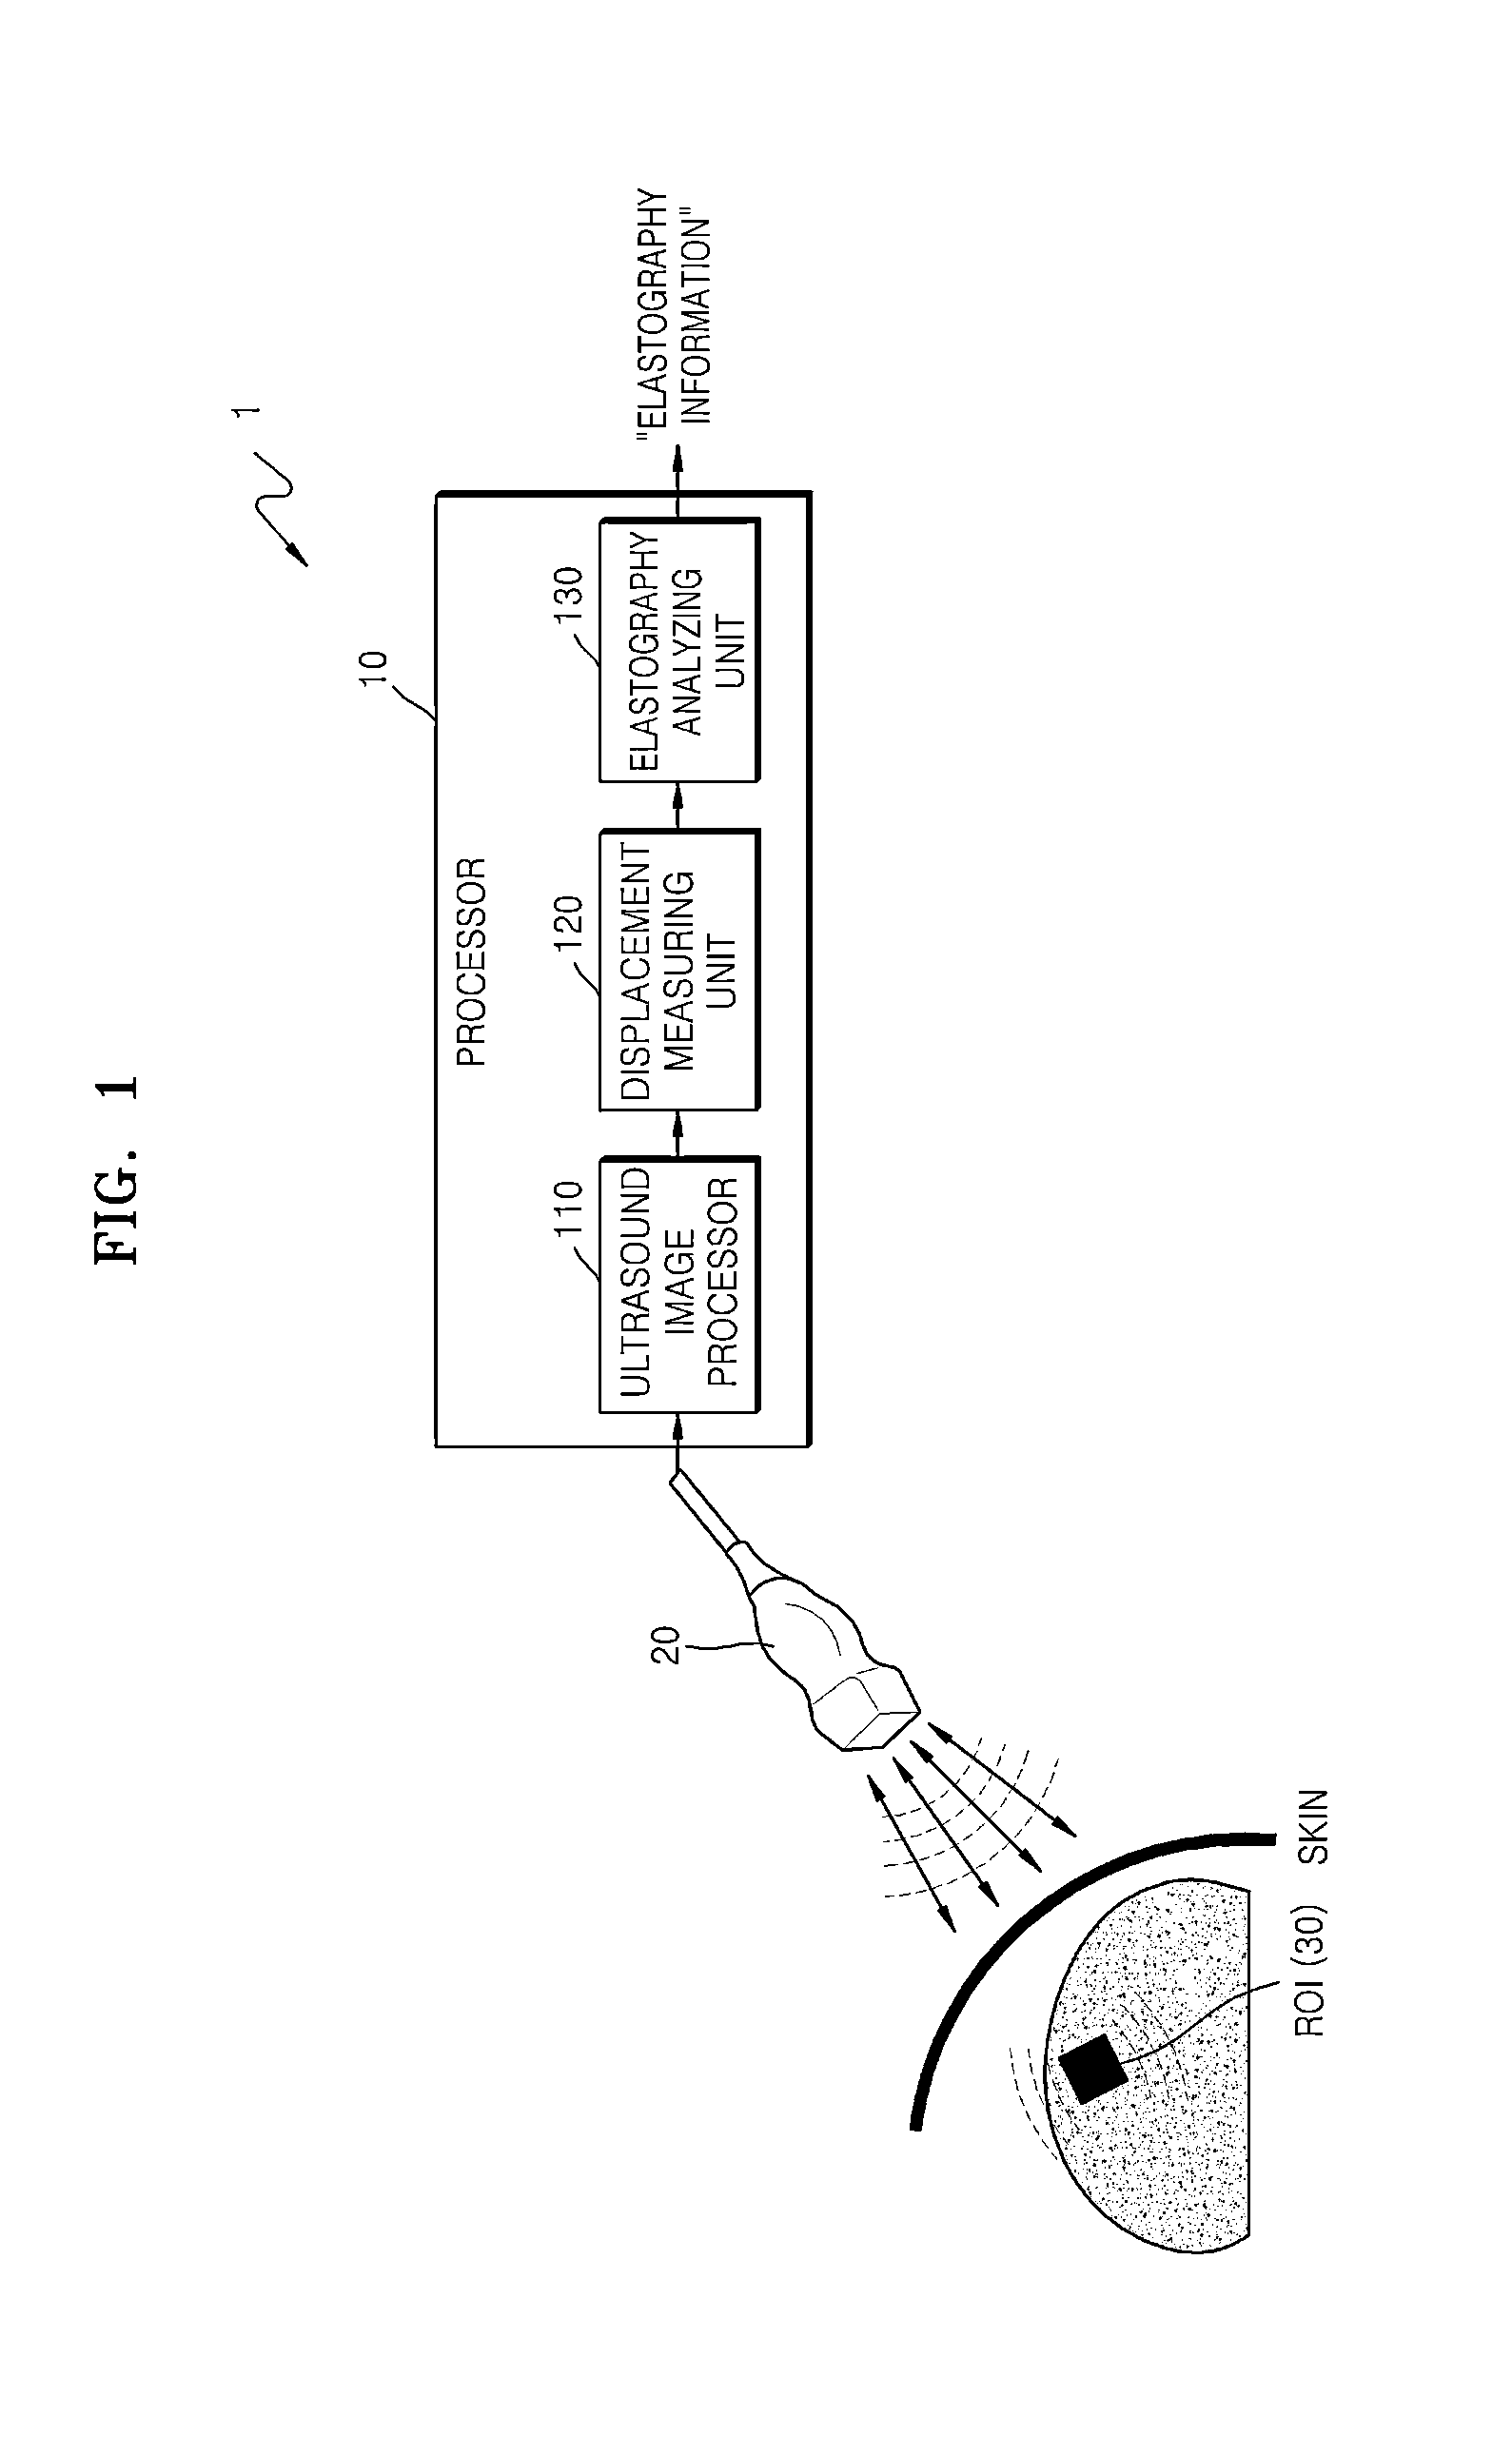 Method and apparatus for analyzing elastography of tissue using ultrasound waves